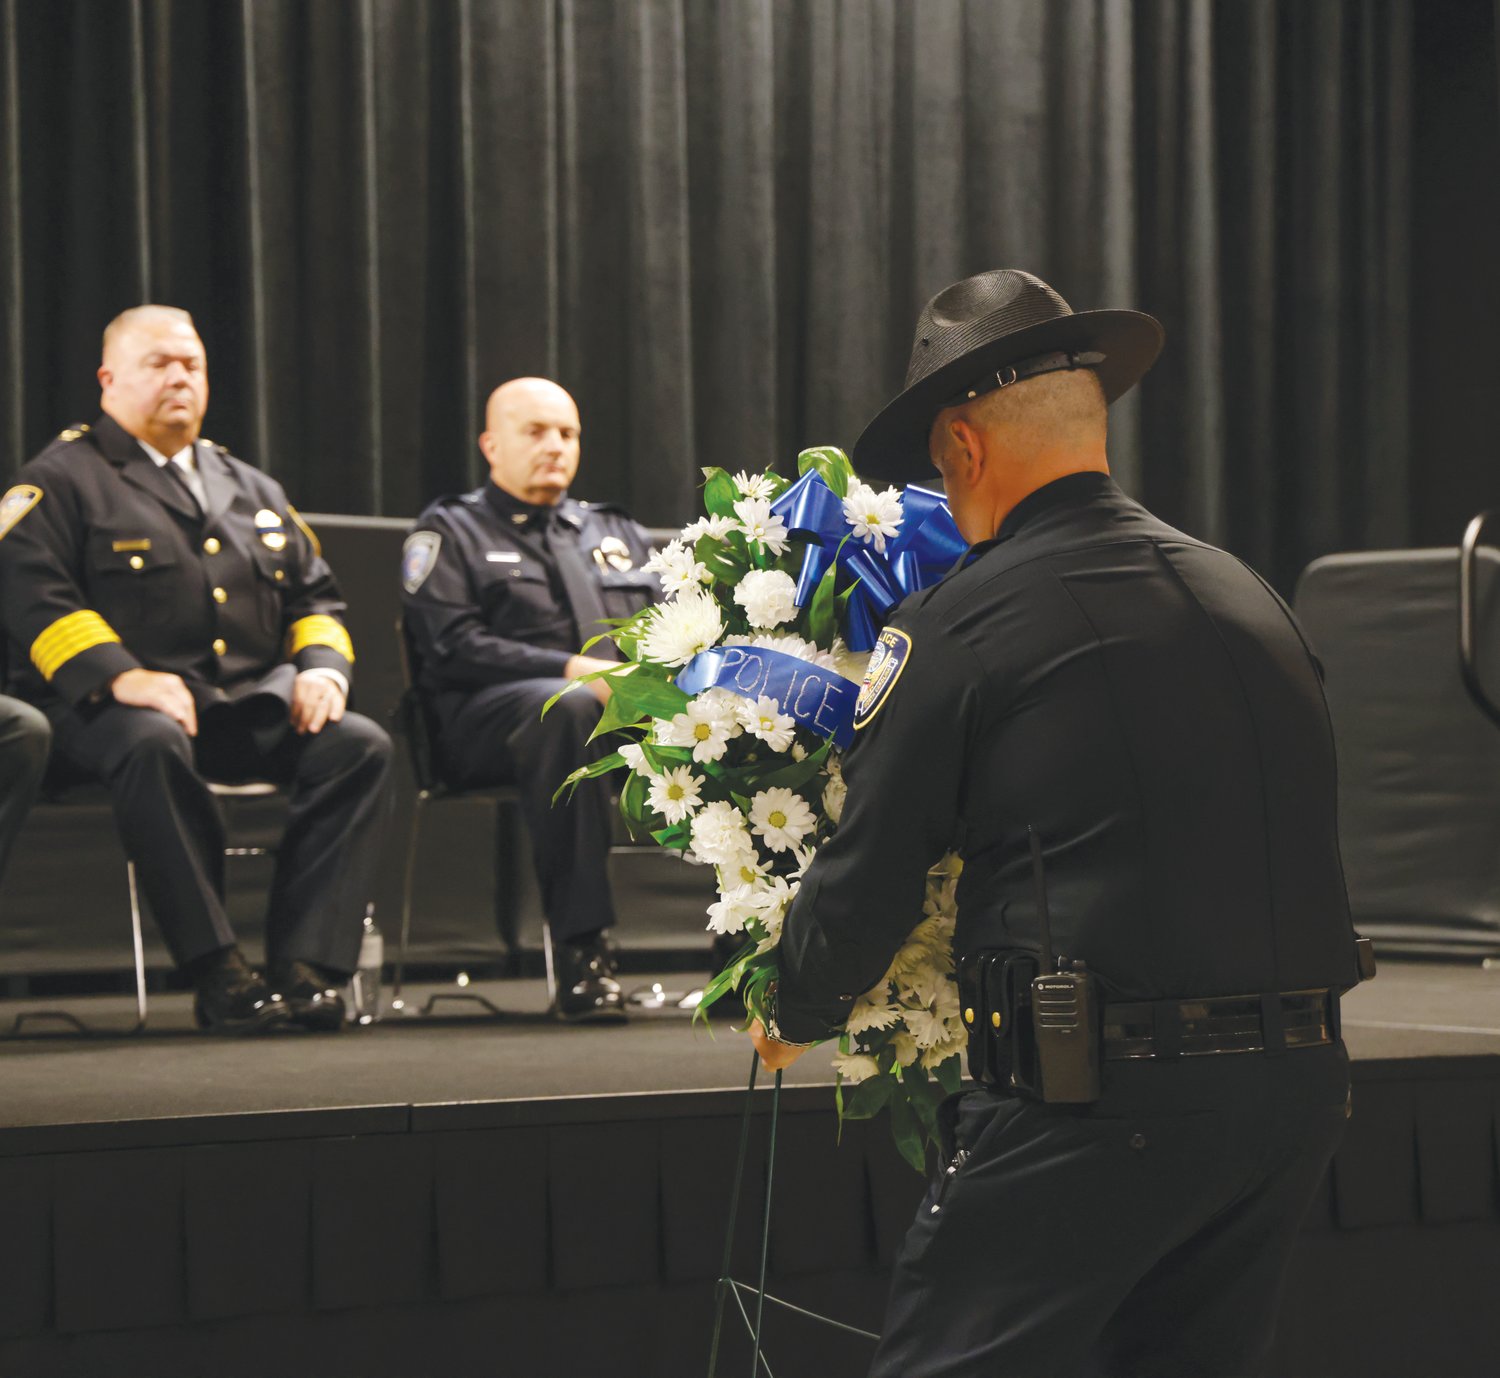 A police officer places this year's Police Remembrance Week wreath during the county's observance last Wednesday.